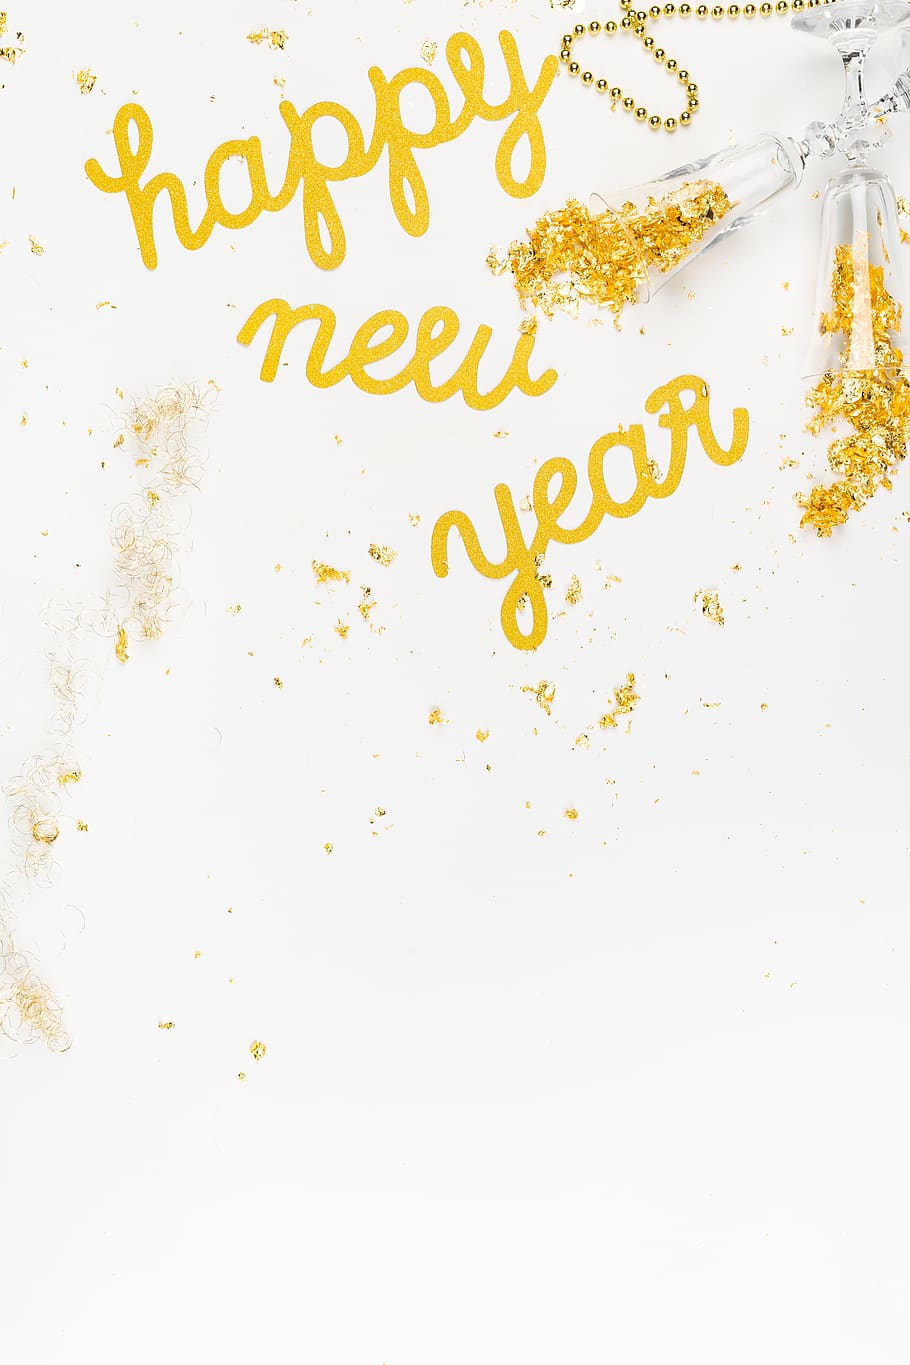 New Years eve, new year, background, white, white background, copy, copy space, copyspace, flatlay, gold